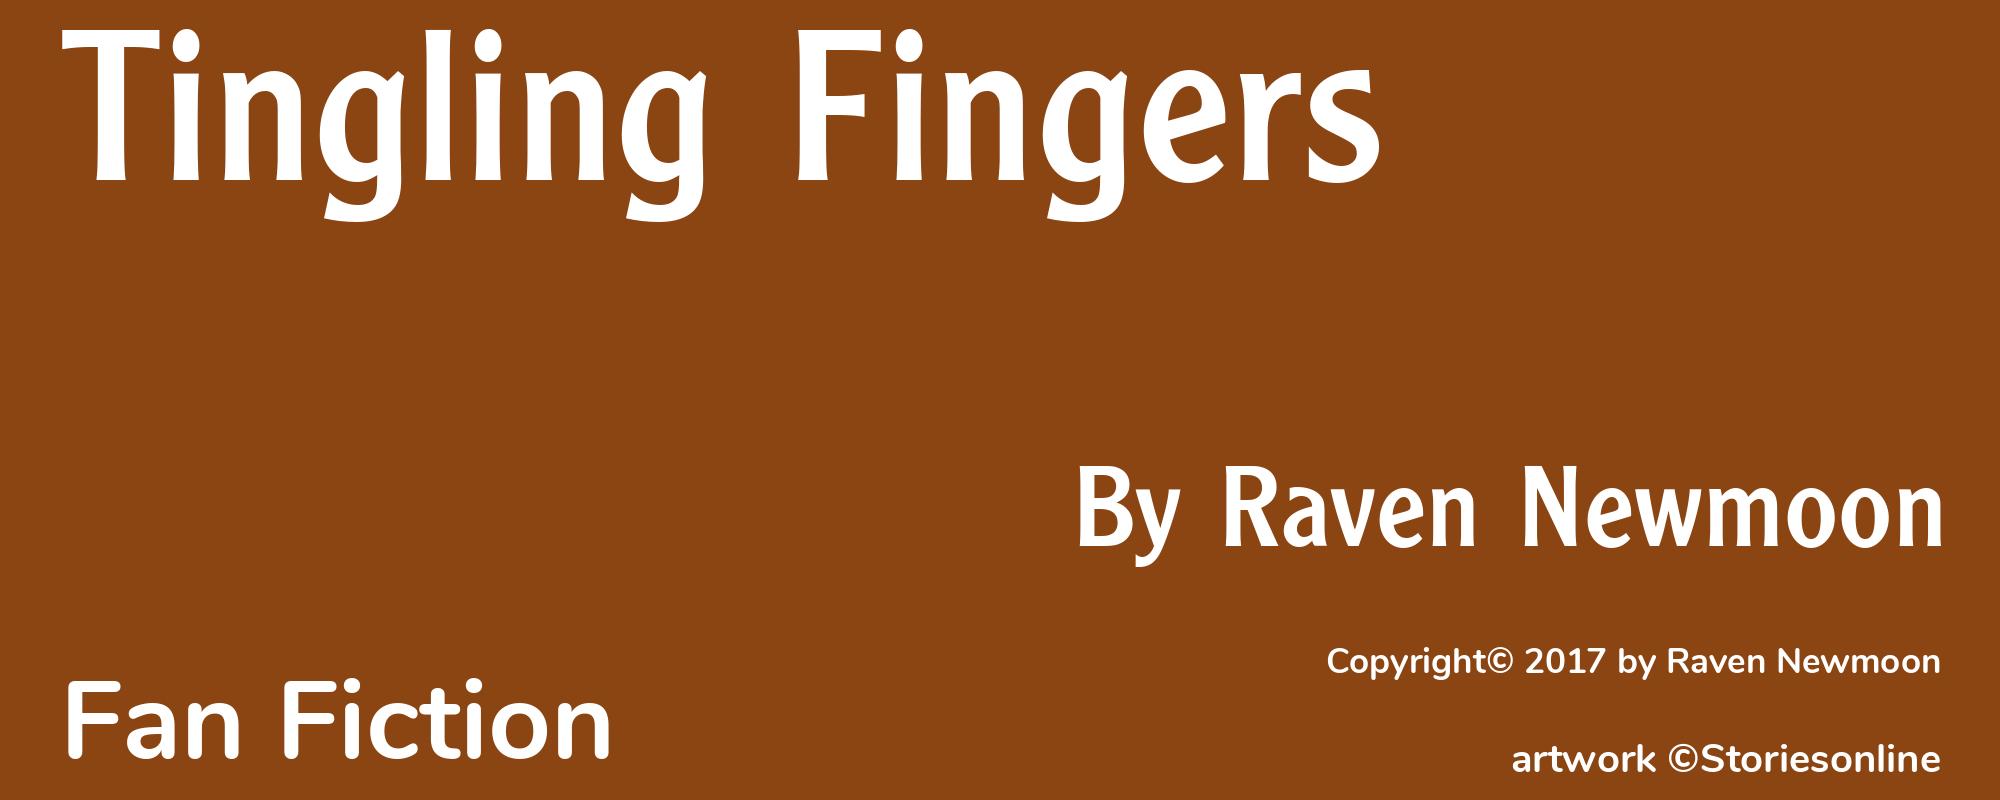 Tingling Fingers - Cover